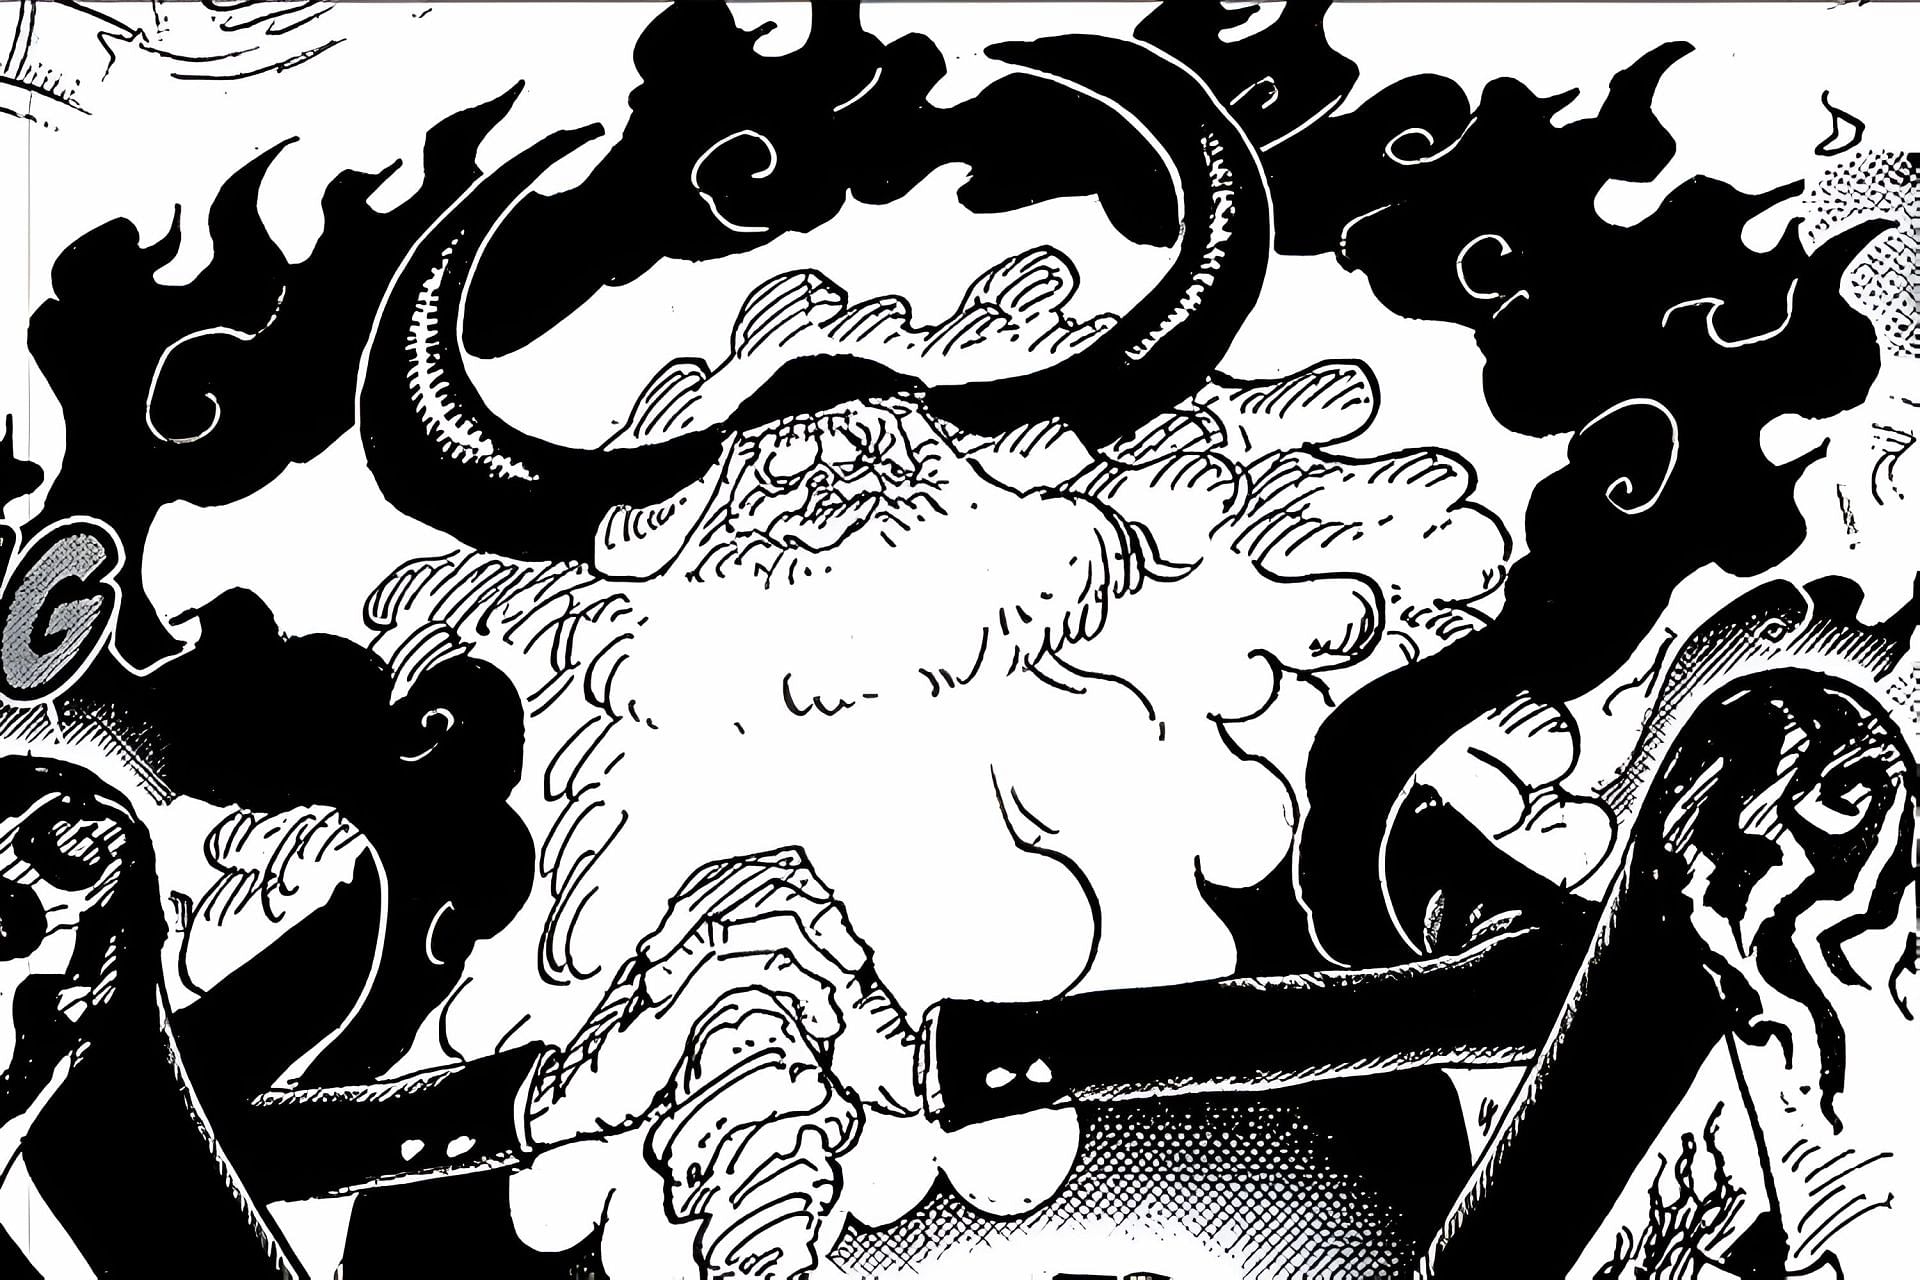 One Piece chapter 1108 full summary: Dr. Vegapunk begins revealing the ...